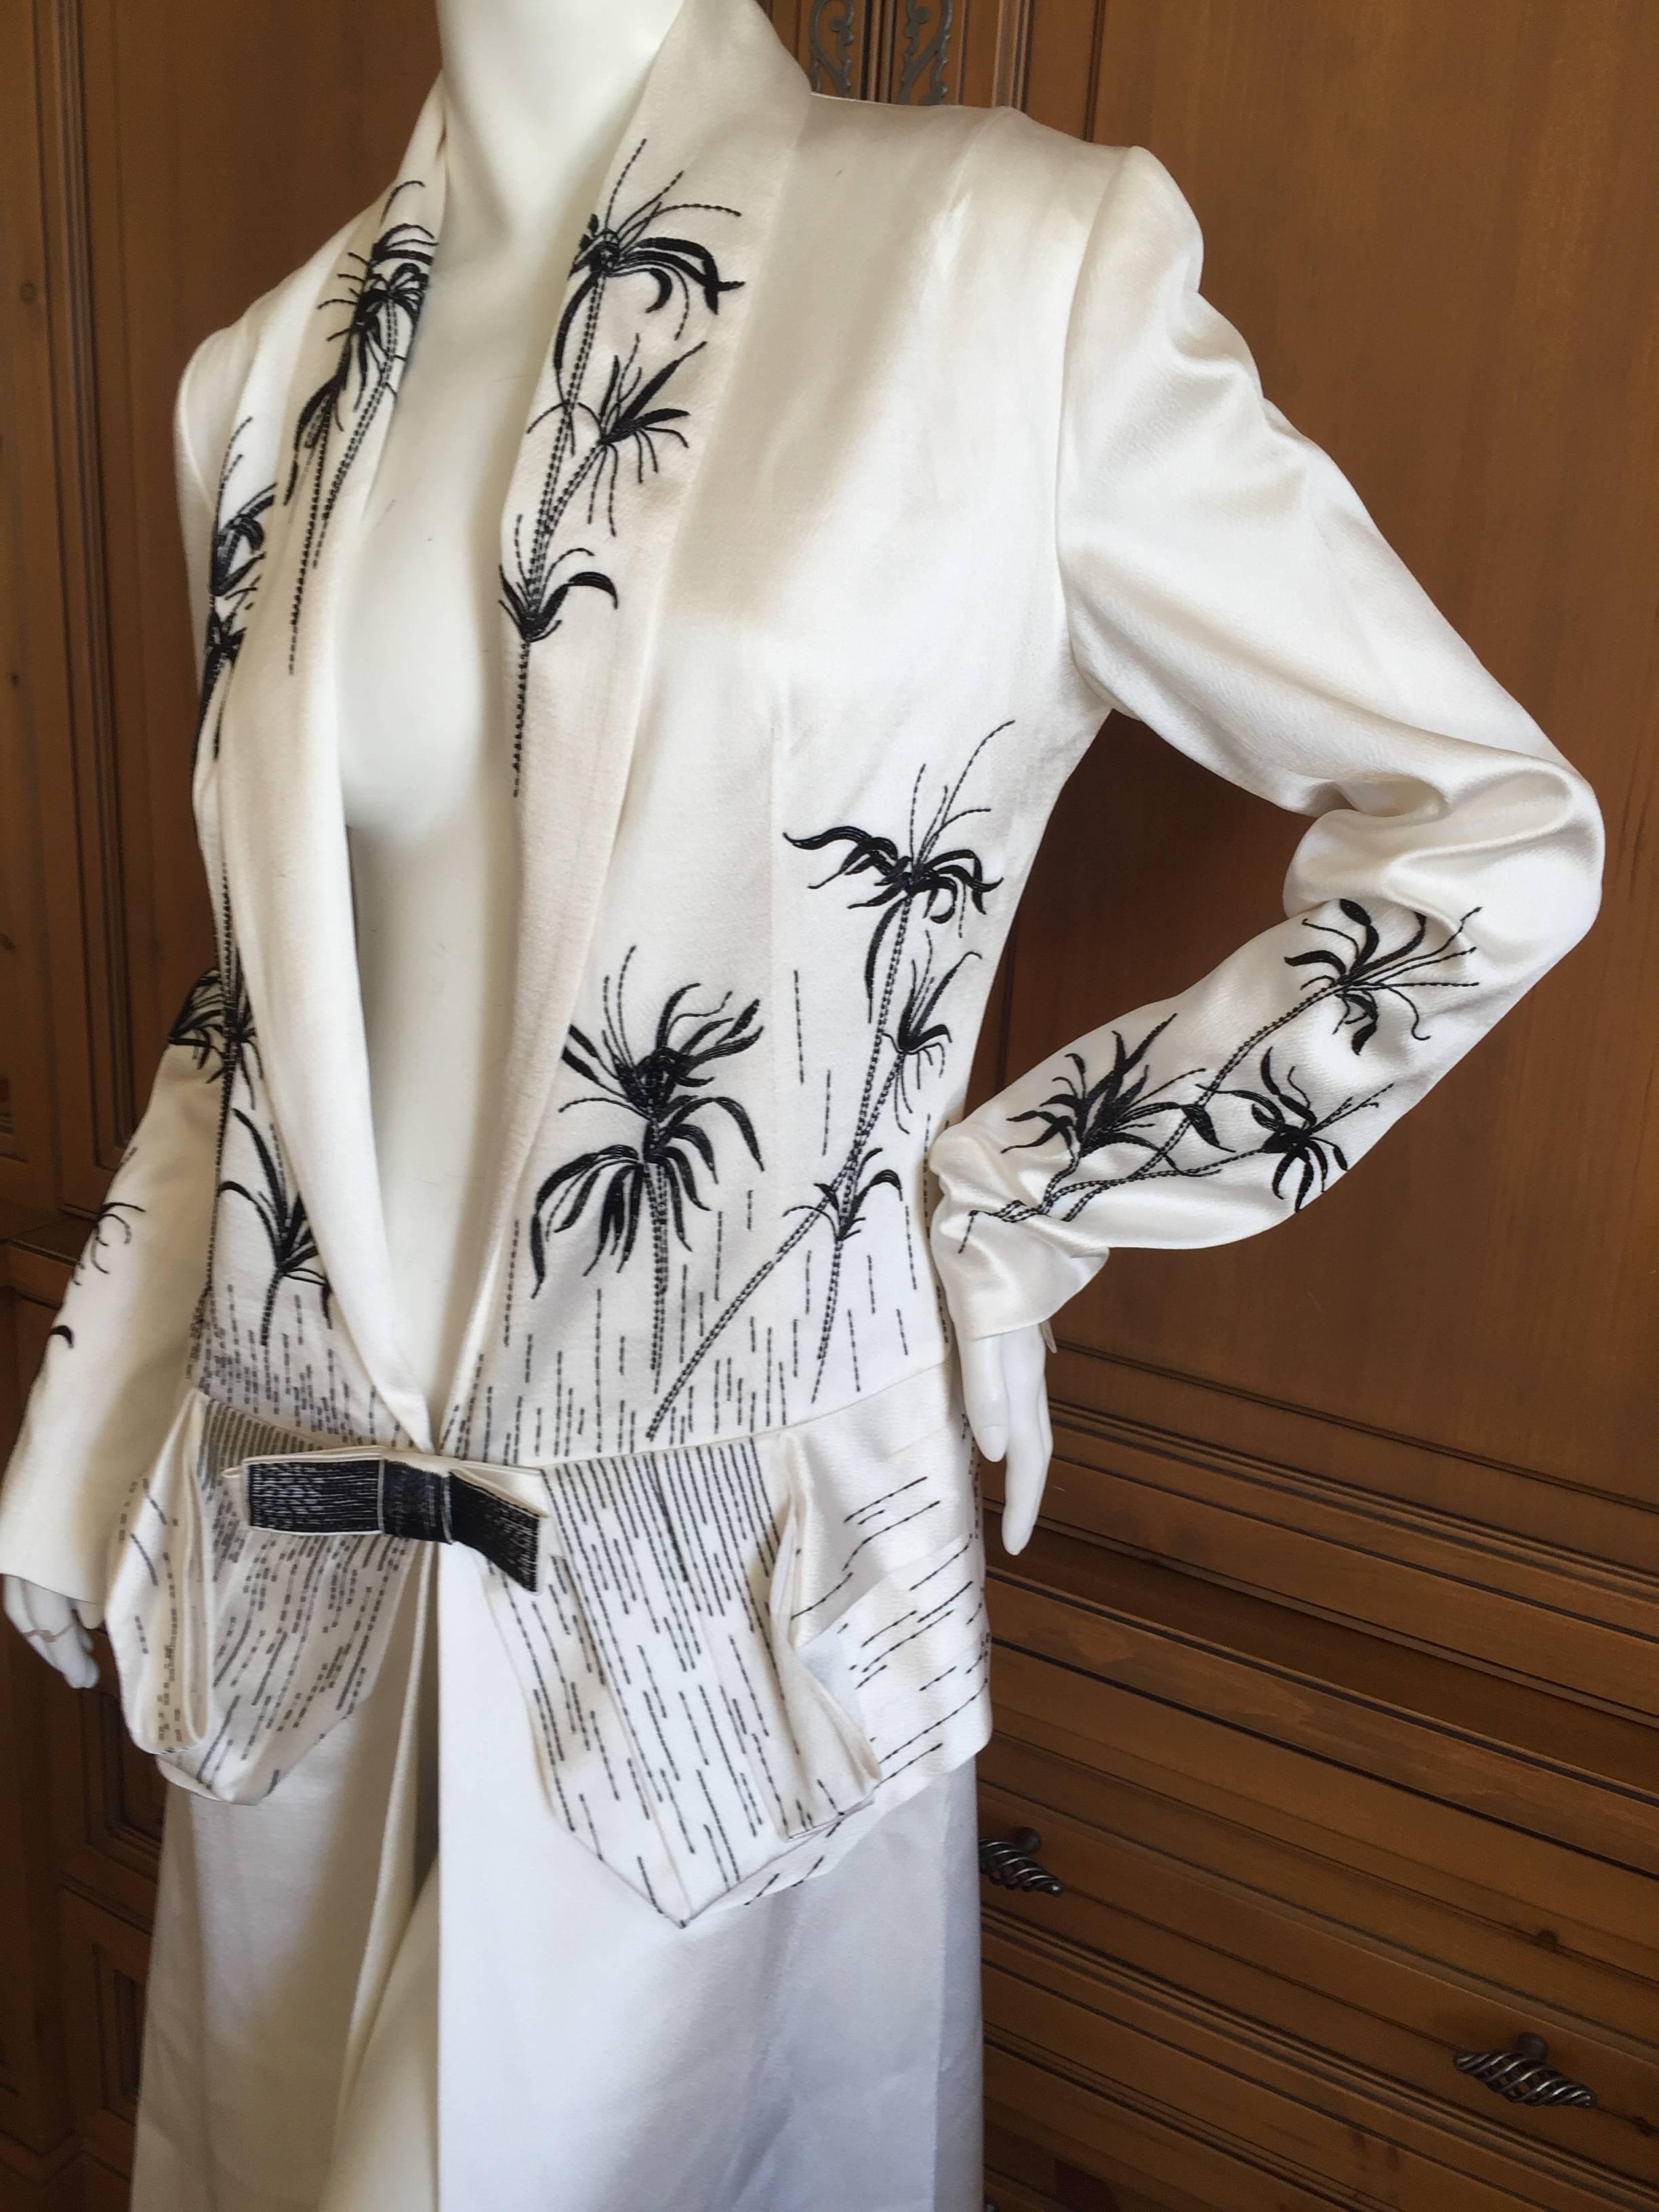 Christian Dior by Gianfranco Ferre White Hammered Silk Beaded Evening Coat In New Condition For Sale In Cloverdale, CA